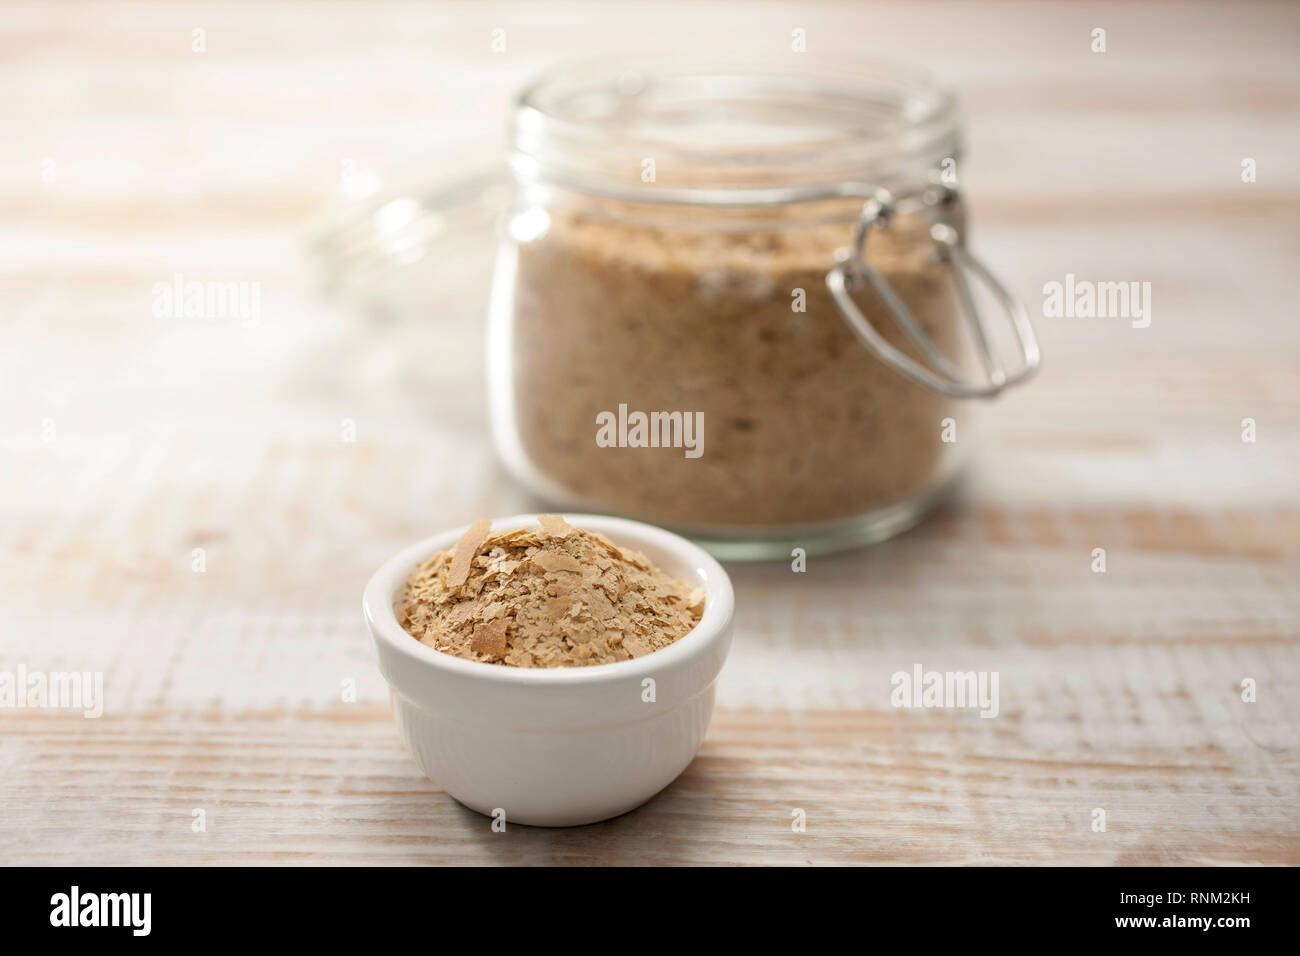 Nutritional yeast flakes in a dish on parque. Stock Photo